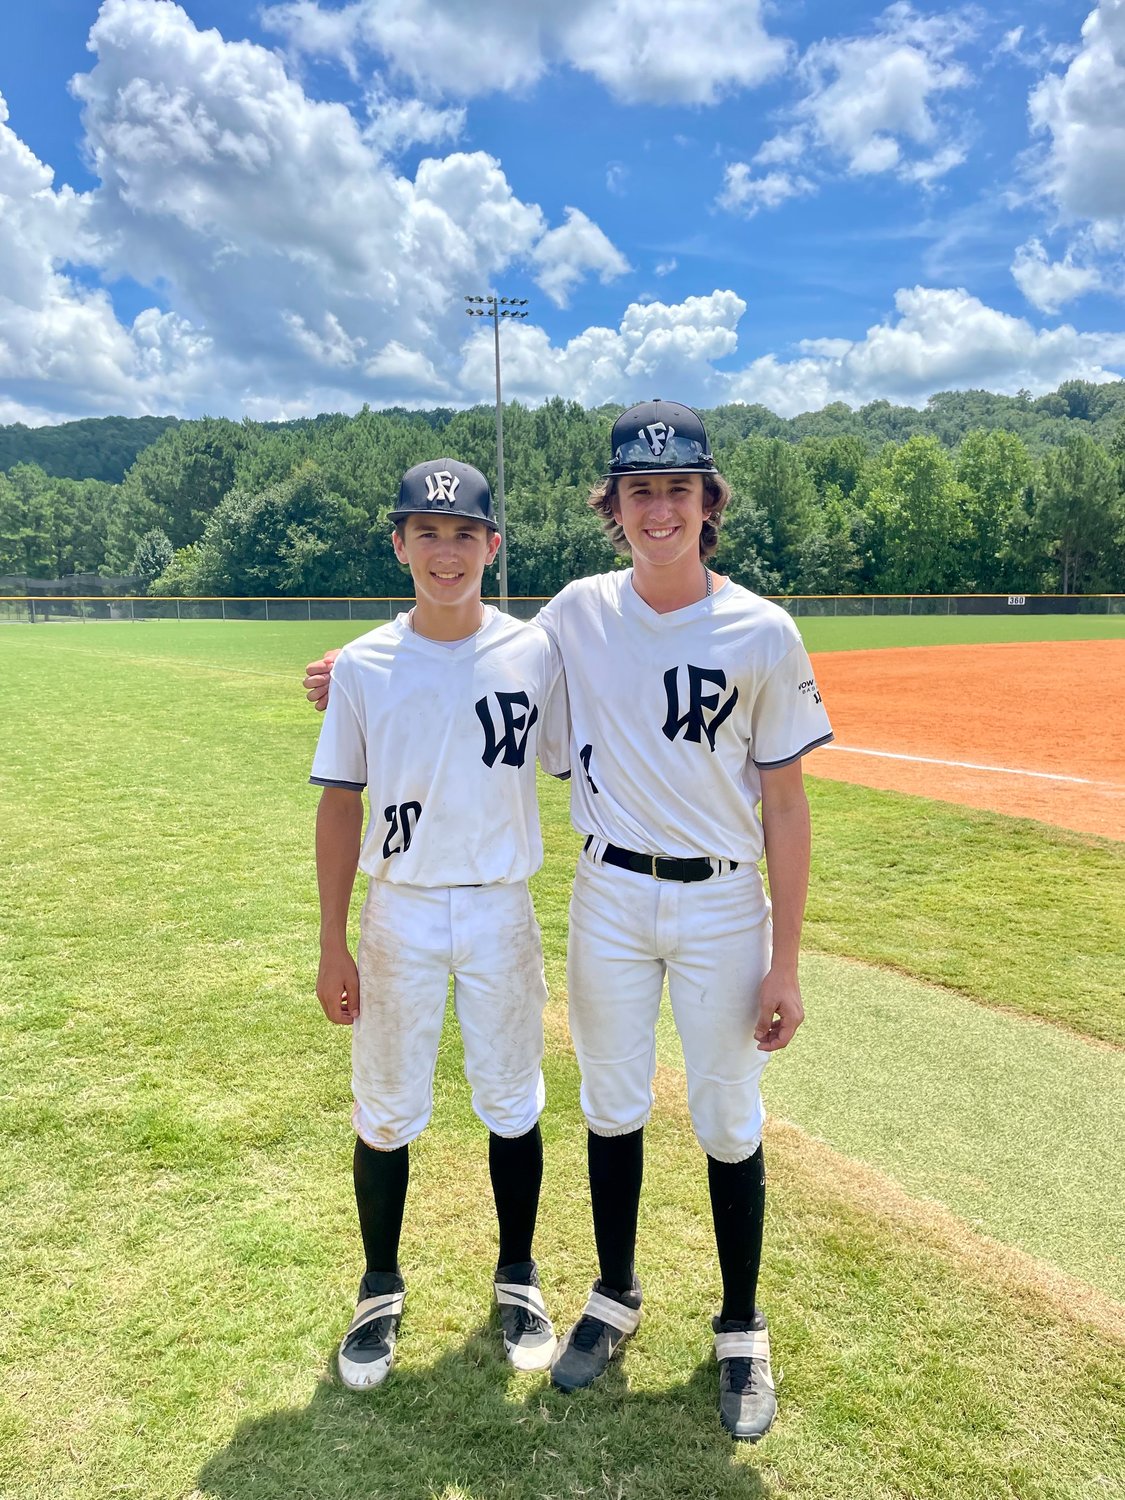 (Left to right) Hunter Fryman and Carson Adams have played baseball together for roughly seven years now, from little league to Wow Factor travel ball, and now playing for the NTIS (National Team Identification Series). The duo not only call each other teammates, but best friends. Unless the Cardinals and Cubs are playing.